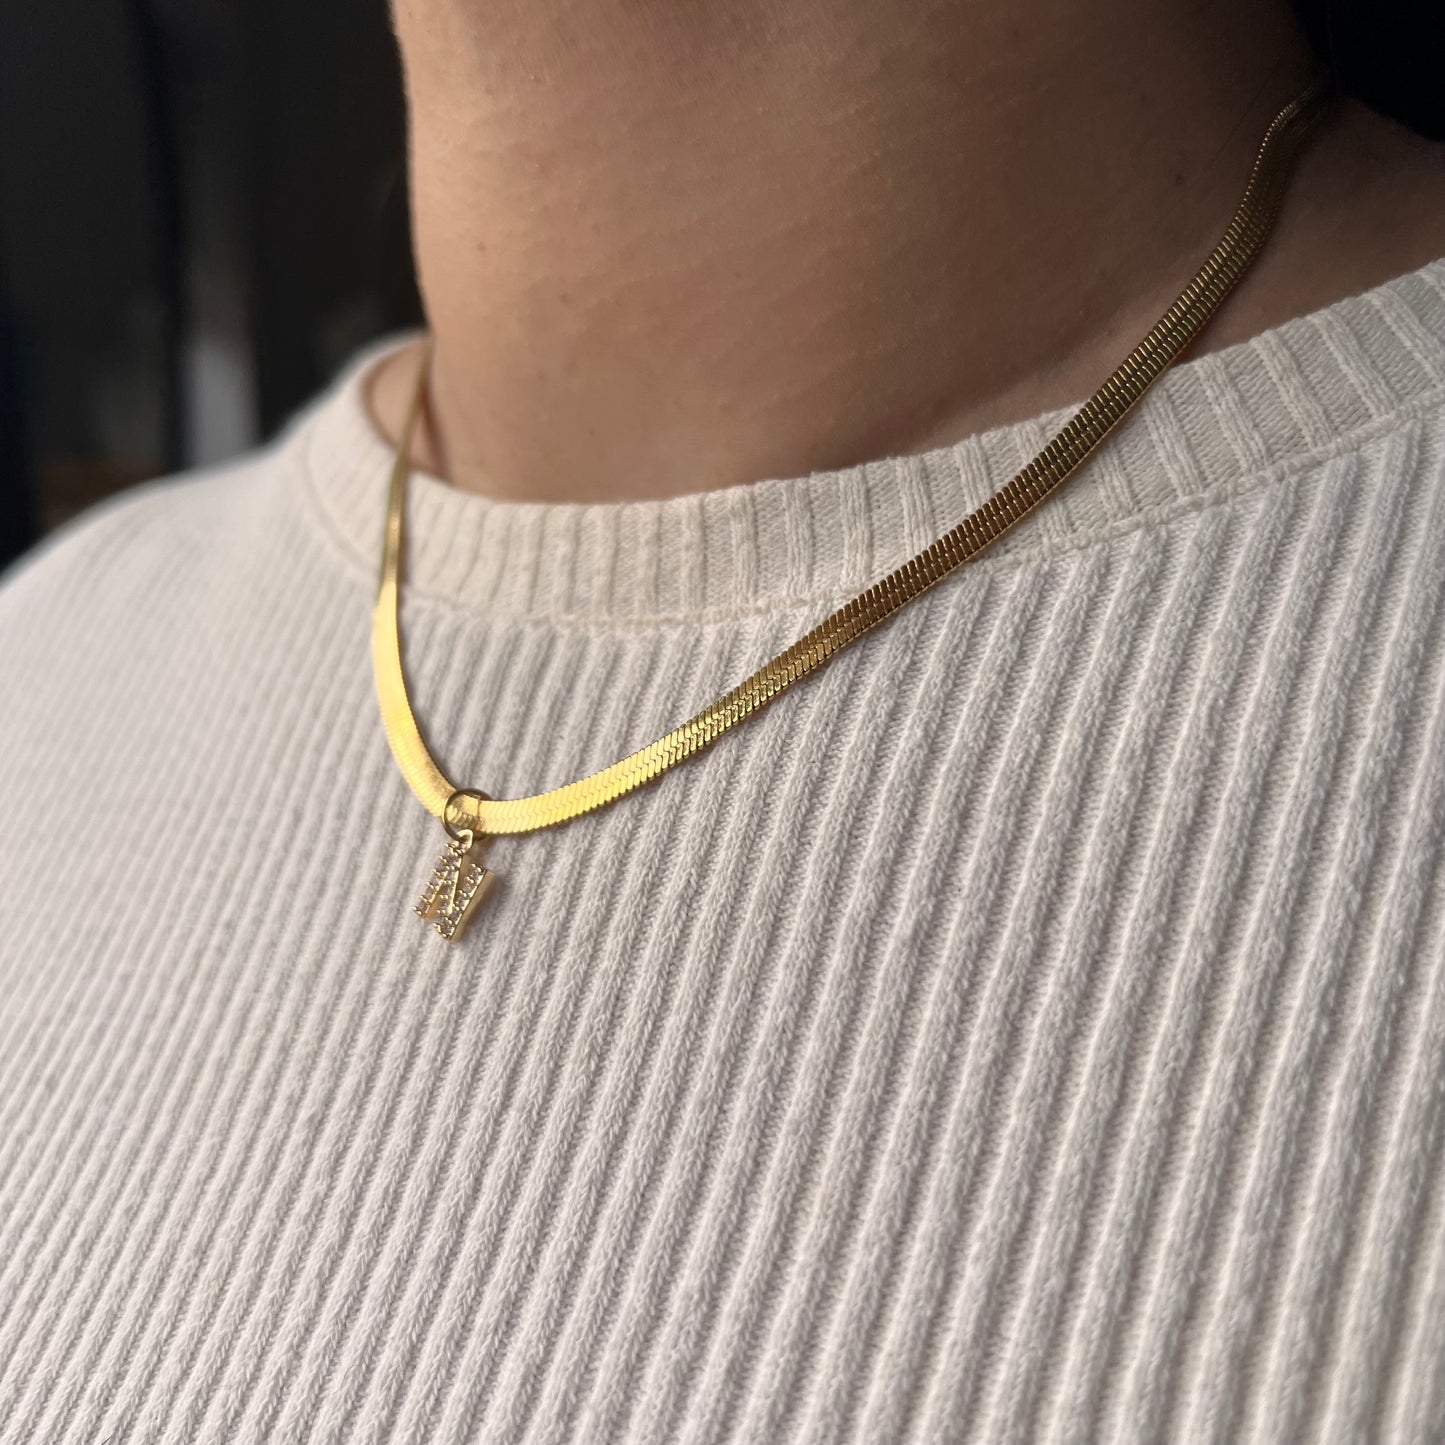 Get trendy with Initial Pendant Tara Necklace -  available at Alma Ireland. Grab yours for €29.99 today!